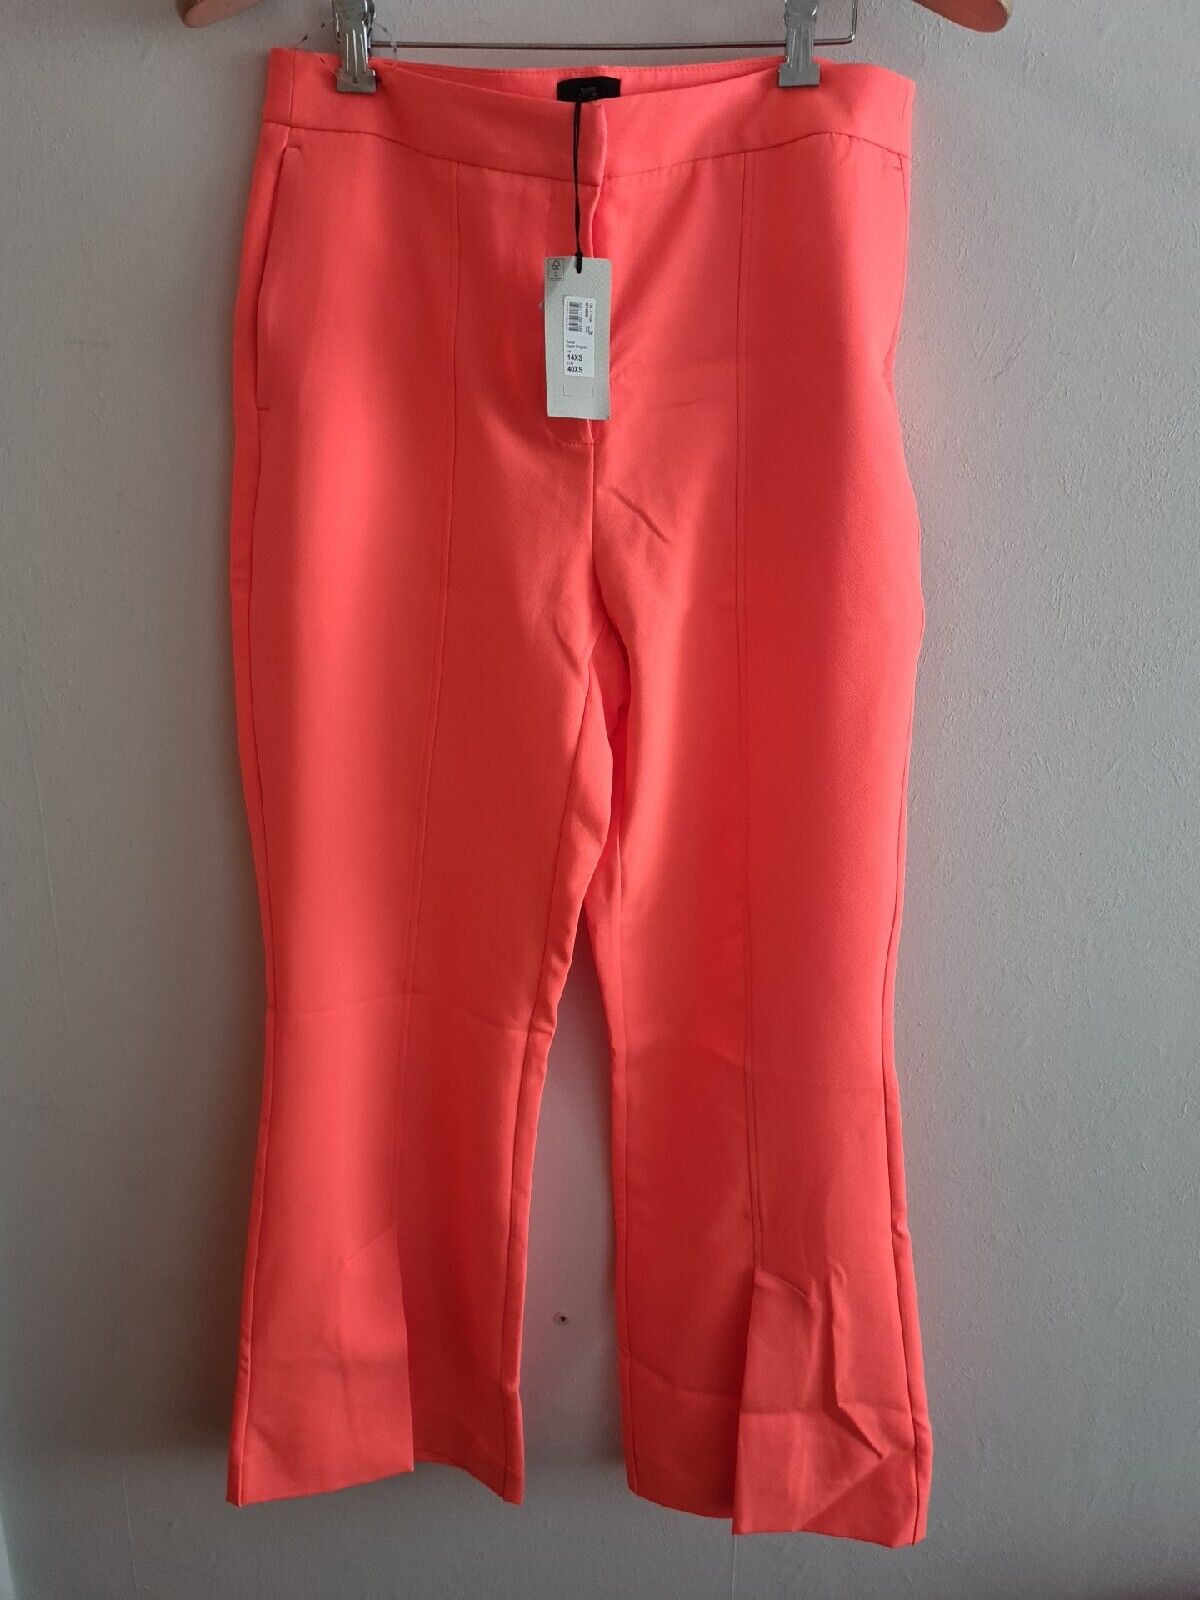 River Island Coral Hyper Brights Trousers Size 14 Petite BNWT Ref****V506